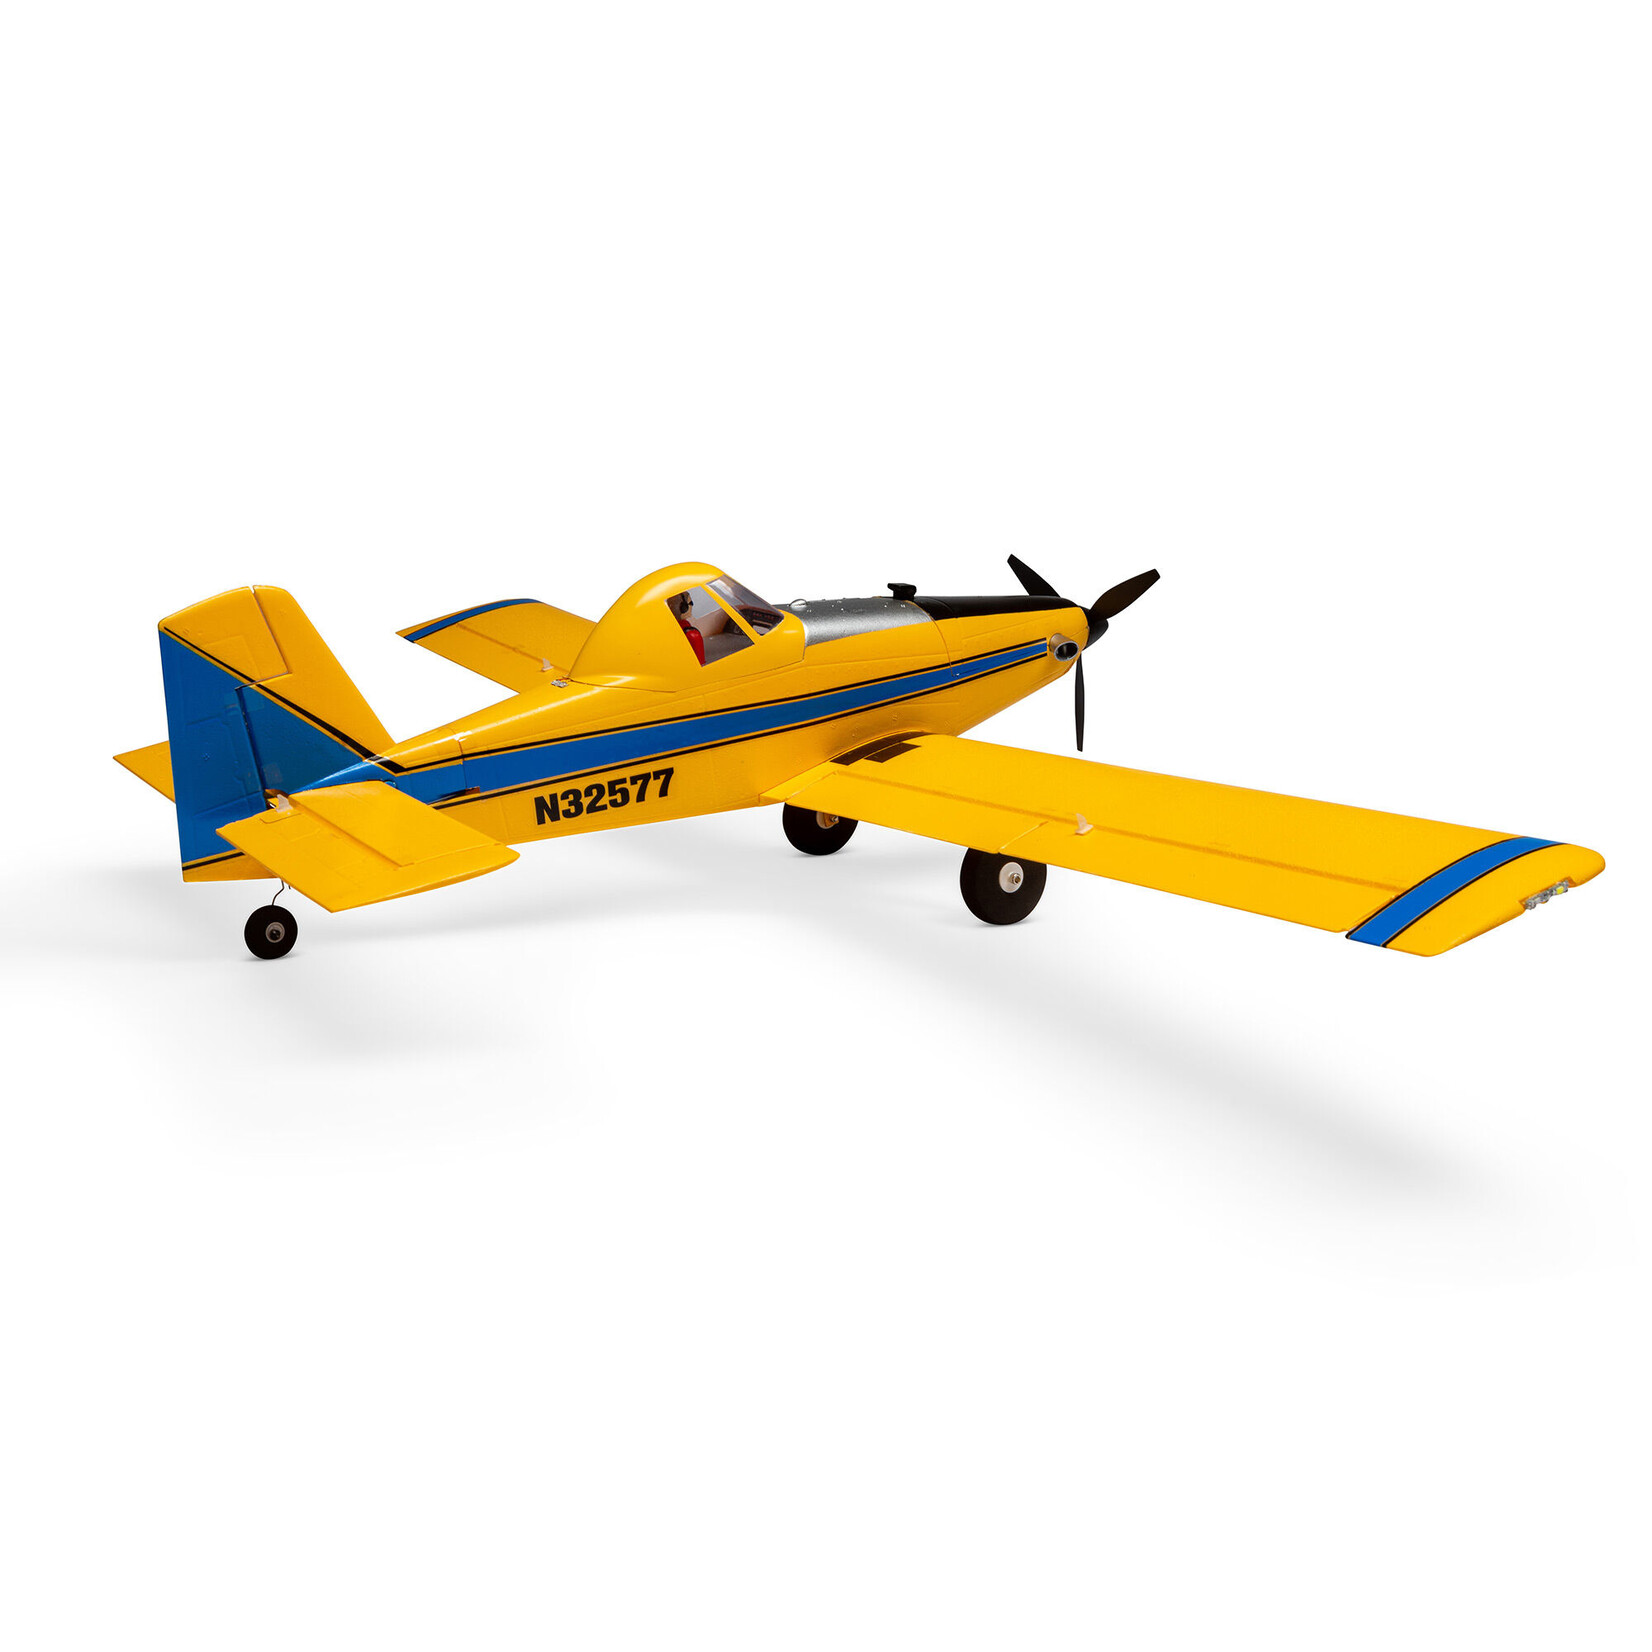 E-Flite UMX Air Tractor BNF Basic with AS3X and SAFE Select